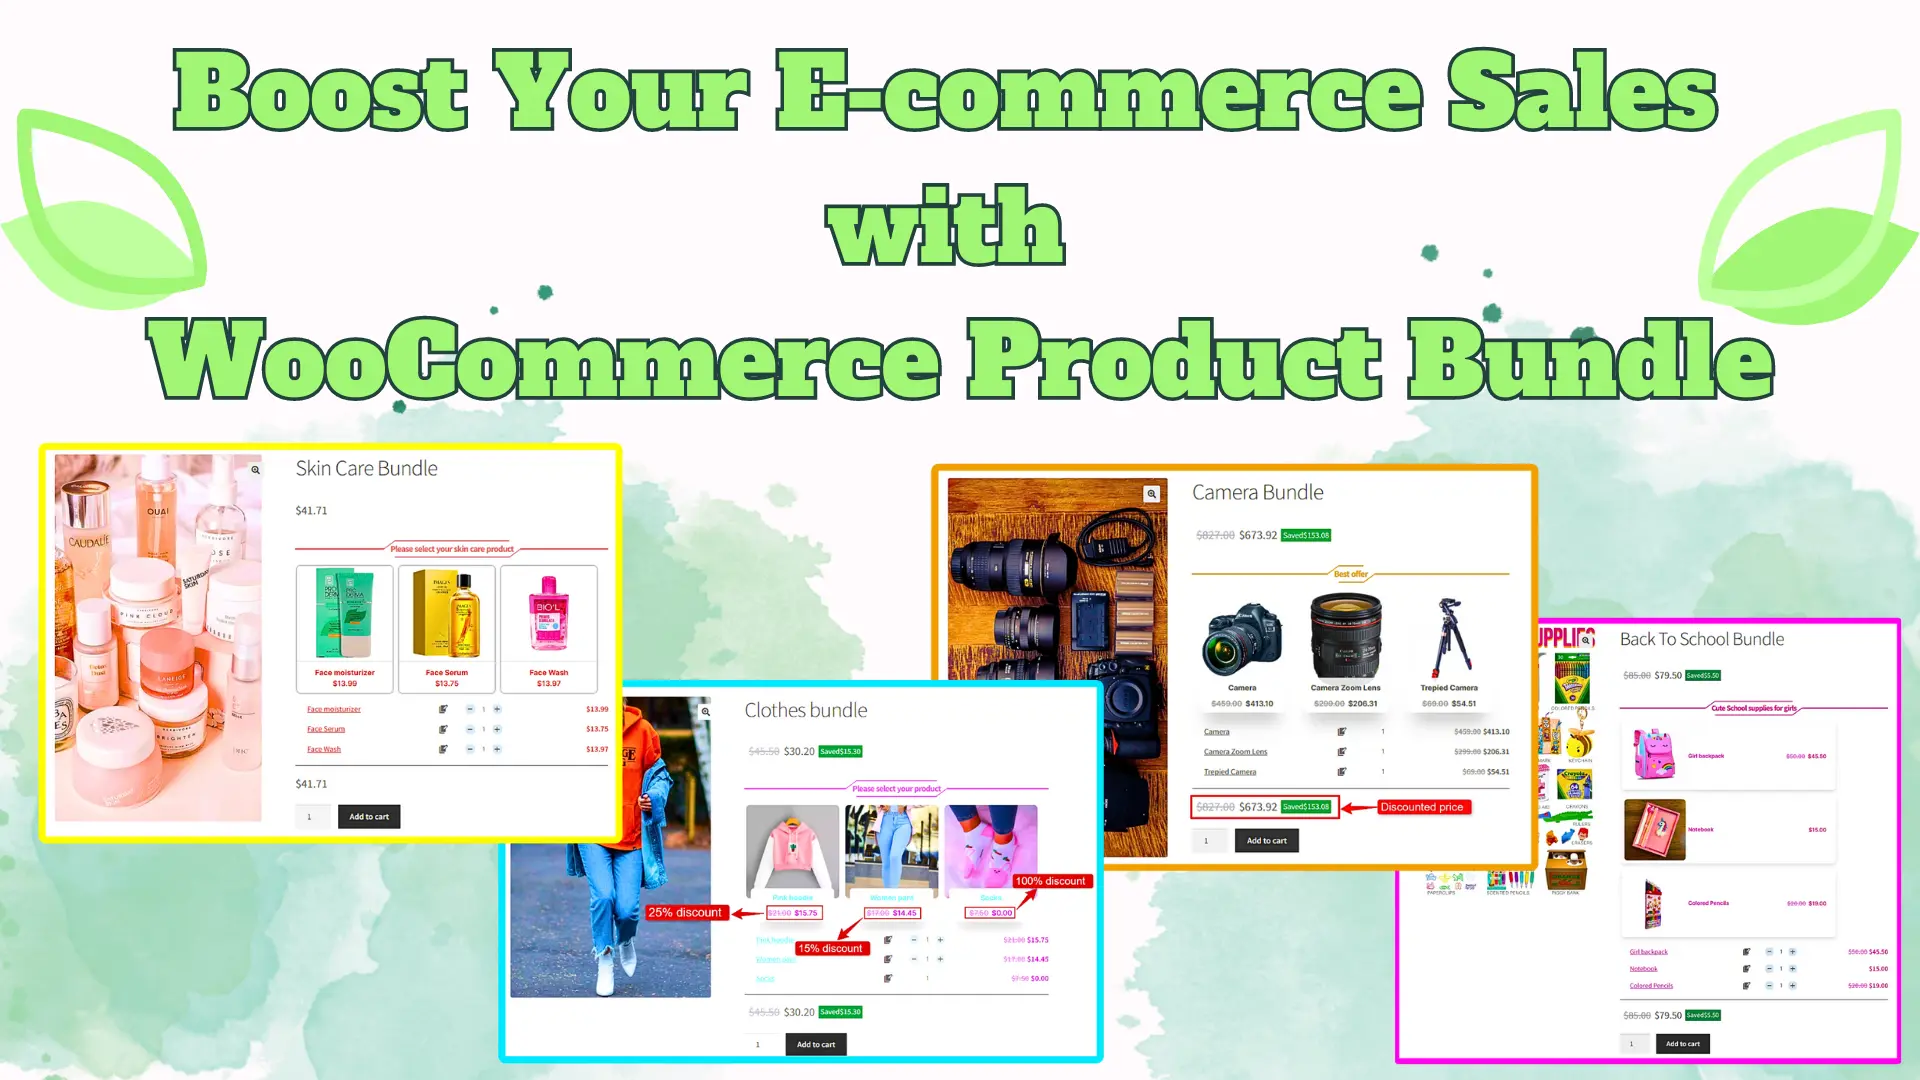 Boost Your E-commerce Sales with WooCommerce Product Bundle